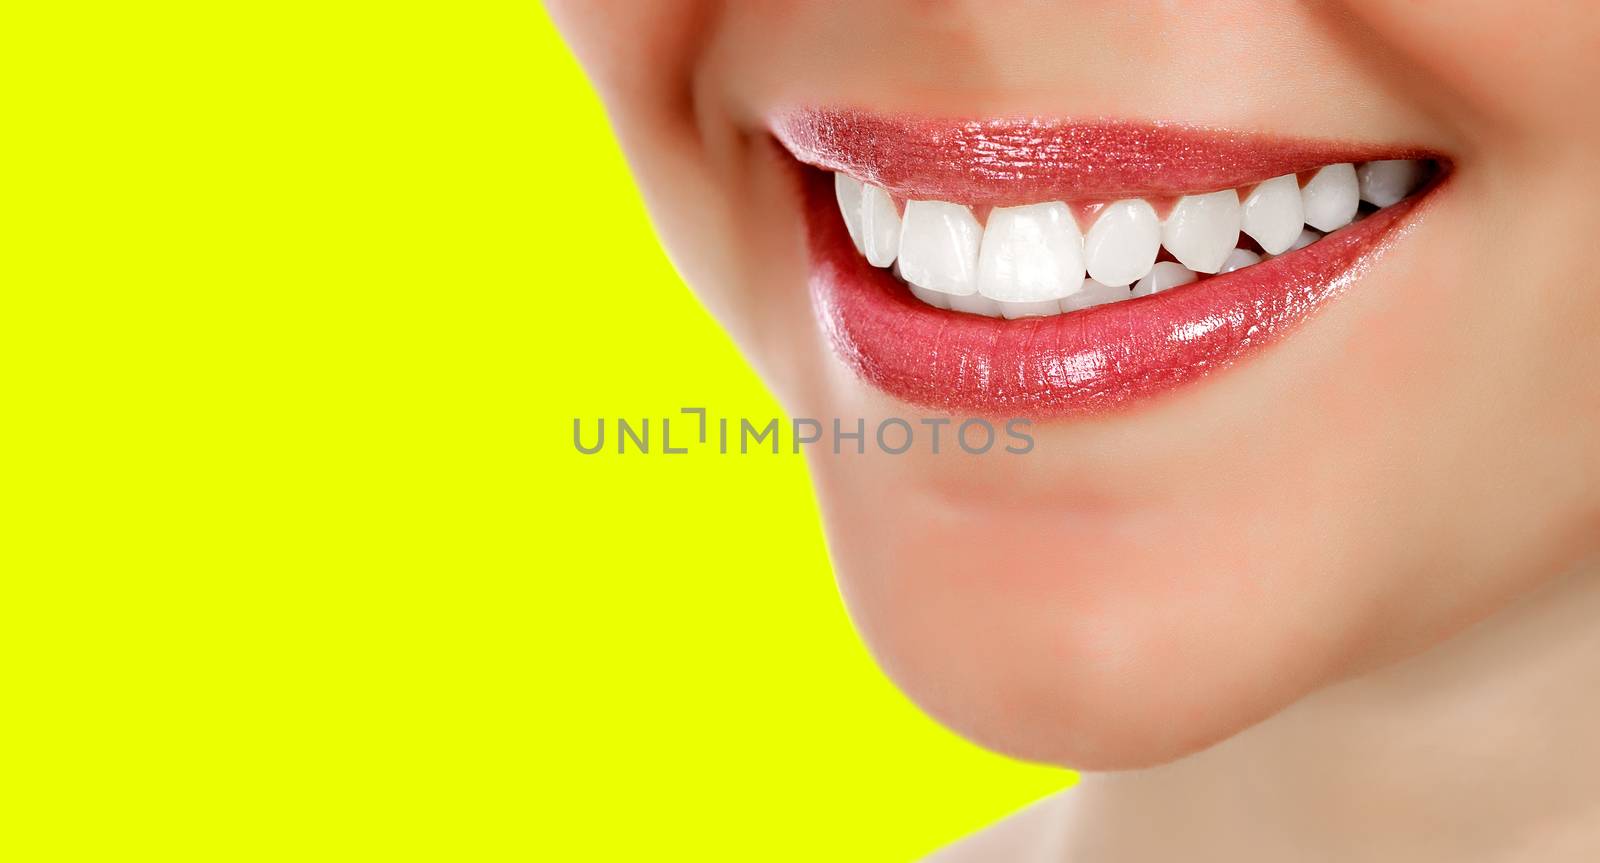 Pretty woman smiling against a yellow background with copyspace